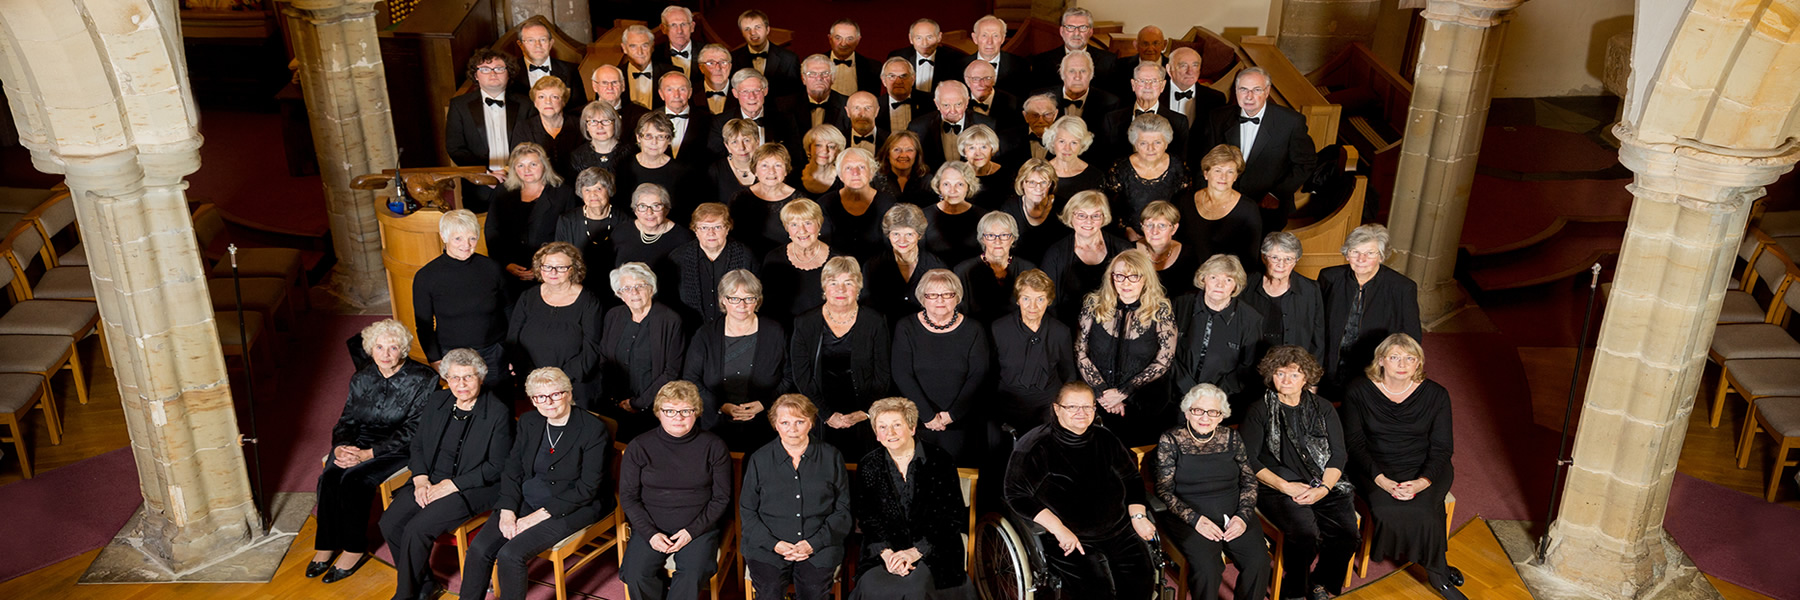 Bingham and District Choral Society group shot